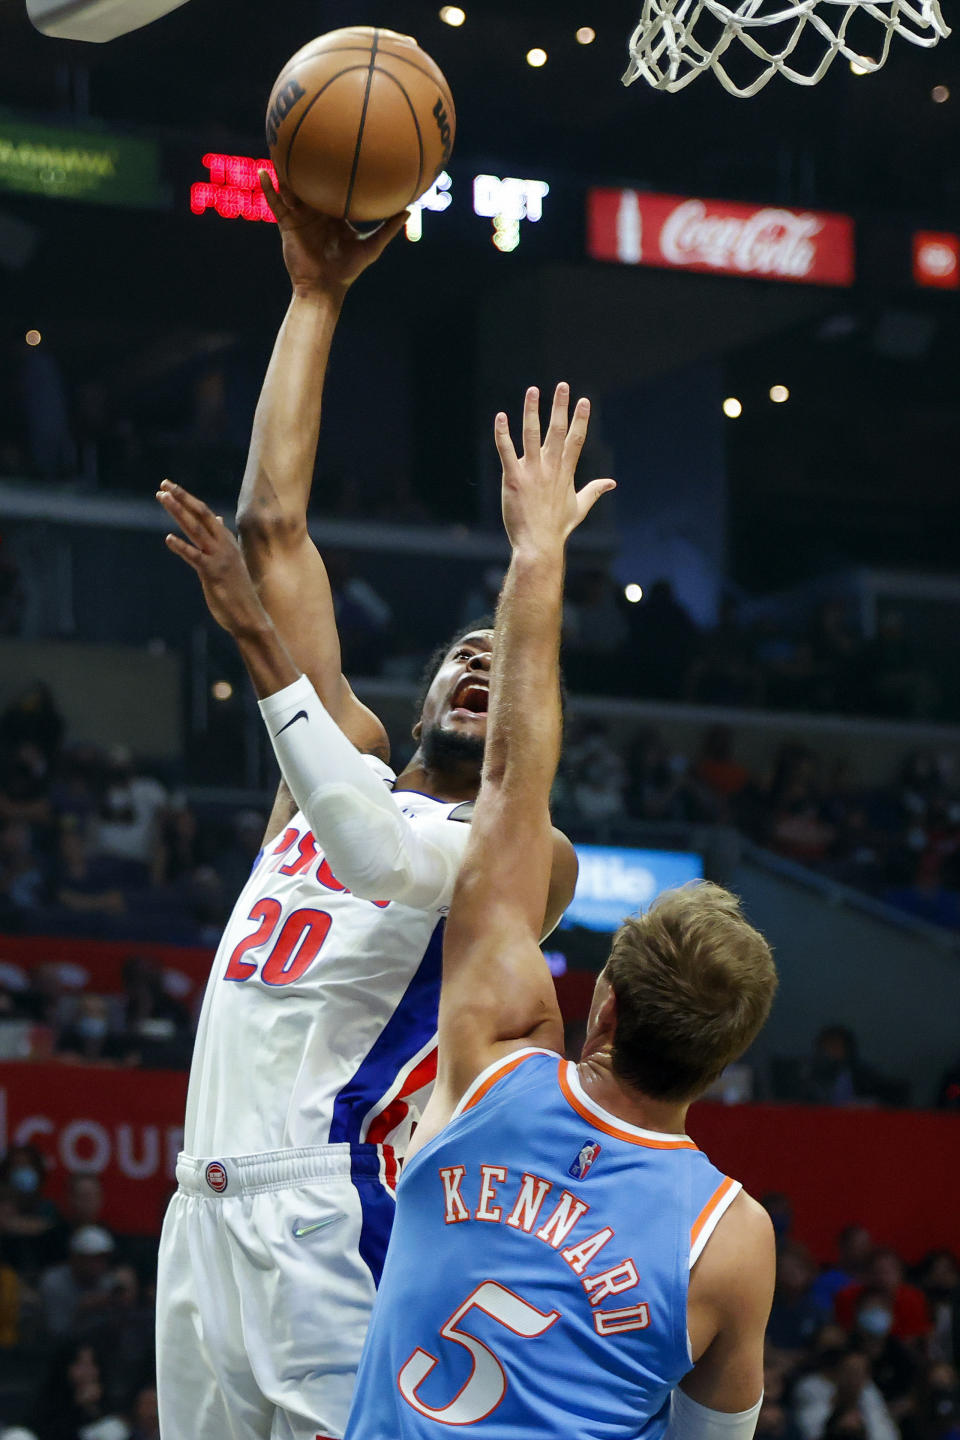 Detroit Pistons guard Josh Jackson (20) shoots against Los Angeles Clippers guard Luke Kennard (5) during the first half of an NBA basketball game, Friday, Nov. 26, 2021, in Los Angeles. (AP Photo/Ringo H.W. Chiu)